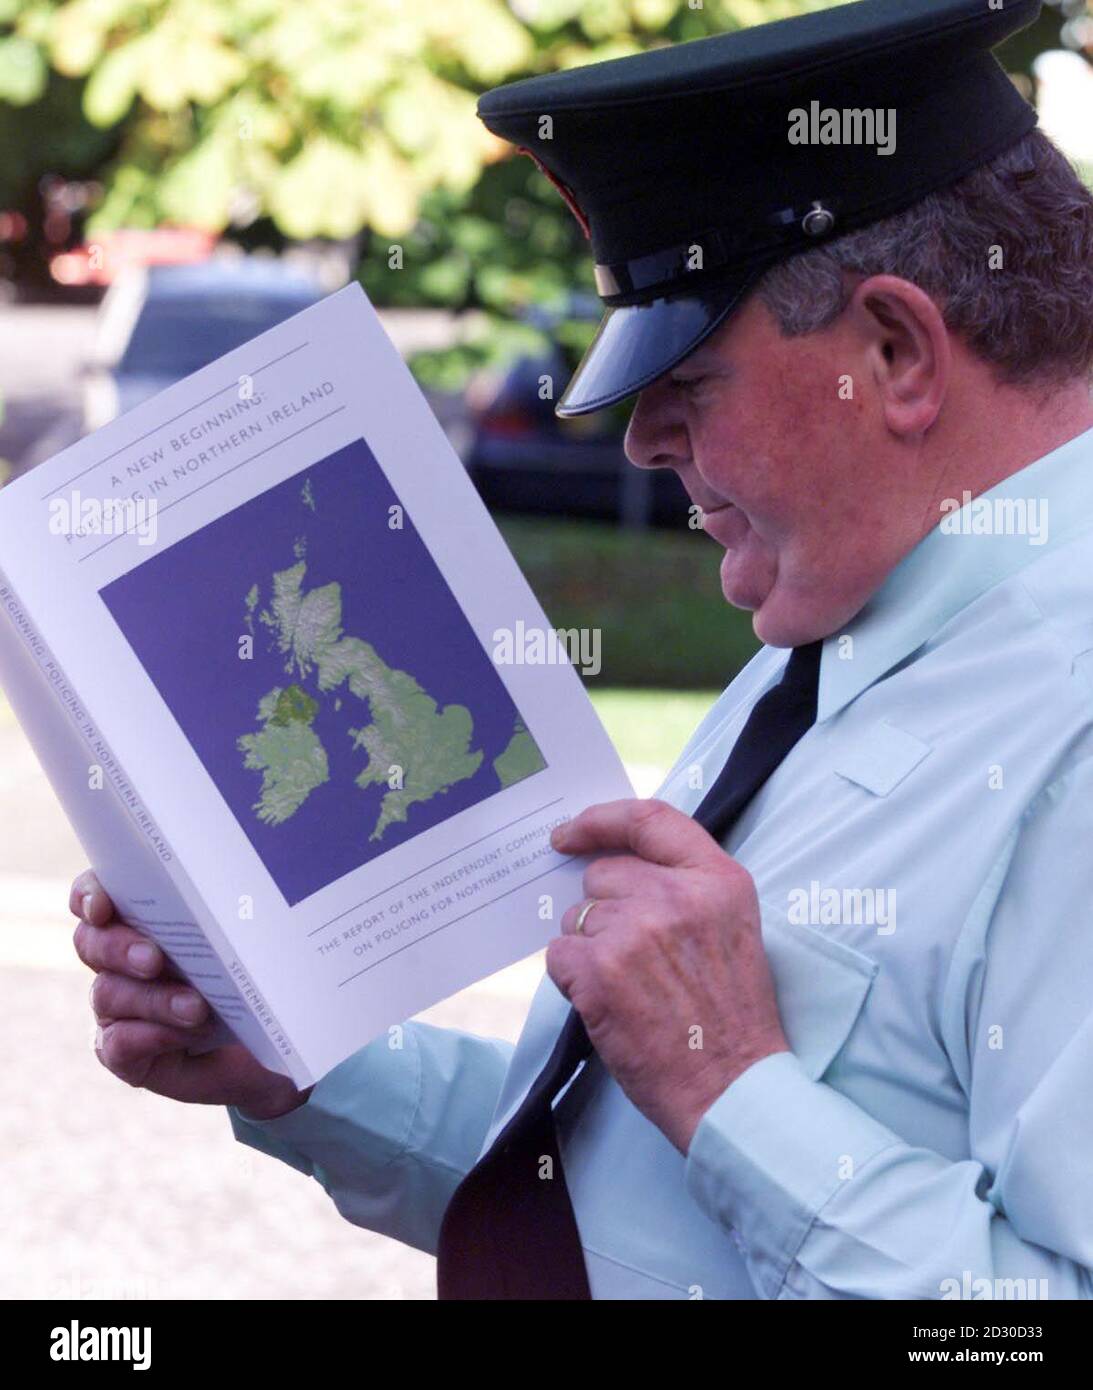 A constable from the Royal Ulster Constabulary looks over the Patten report into the reform of the RUC, at RUC headquarters, in Belfast. Stock Photo